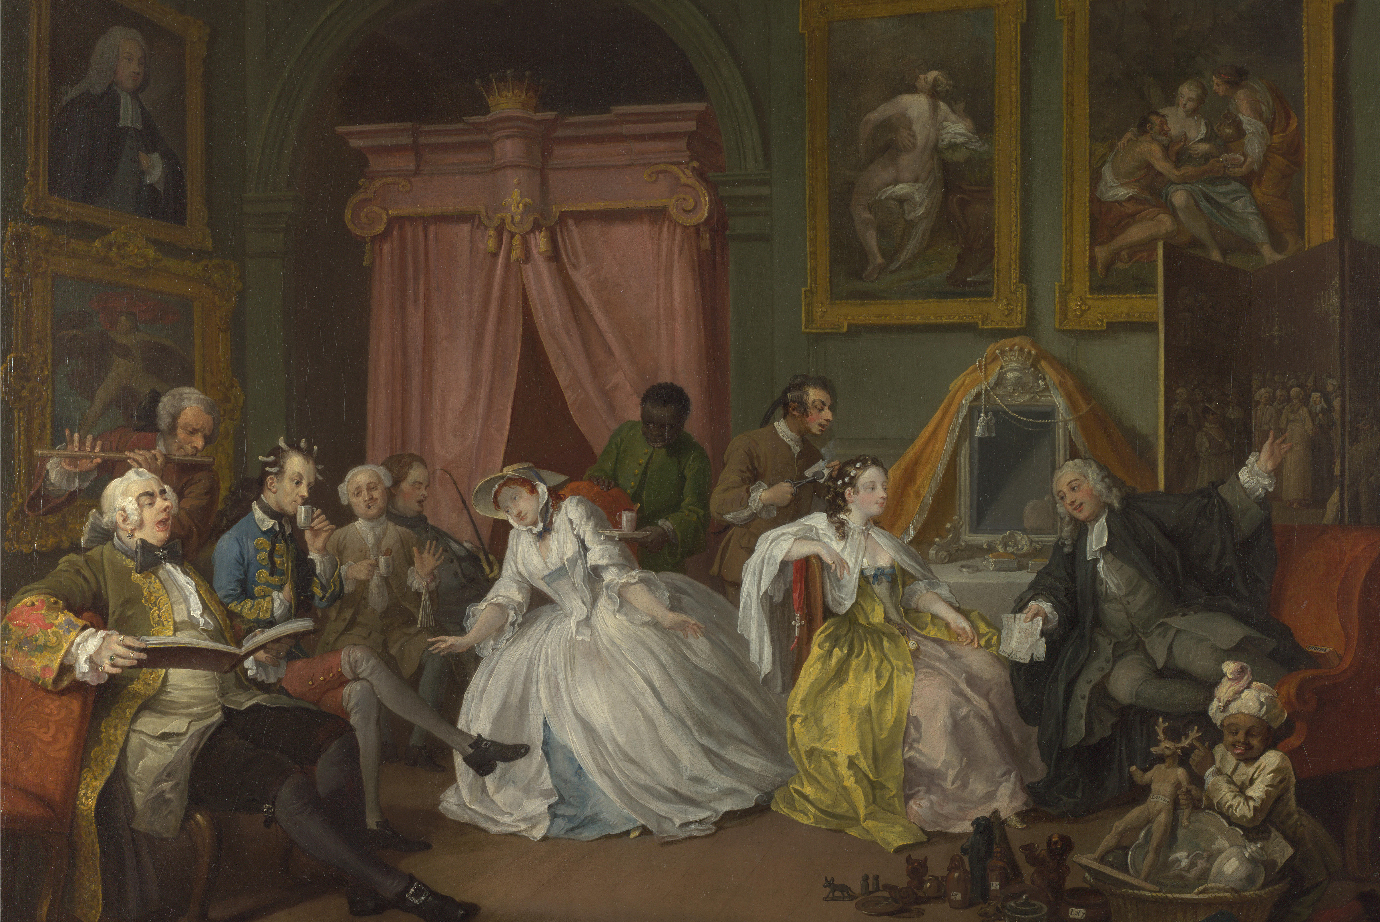 A 18th century painting of aristocratic women and men socializing in a parlor